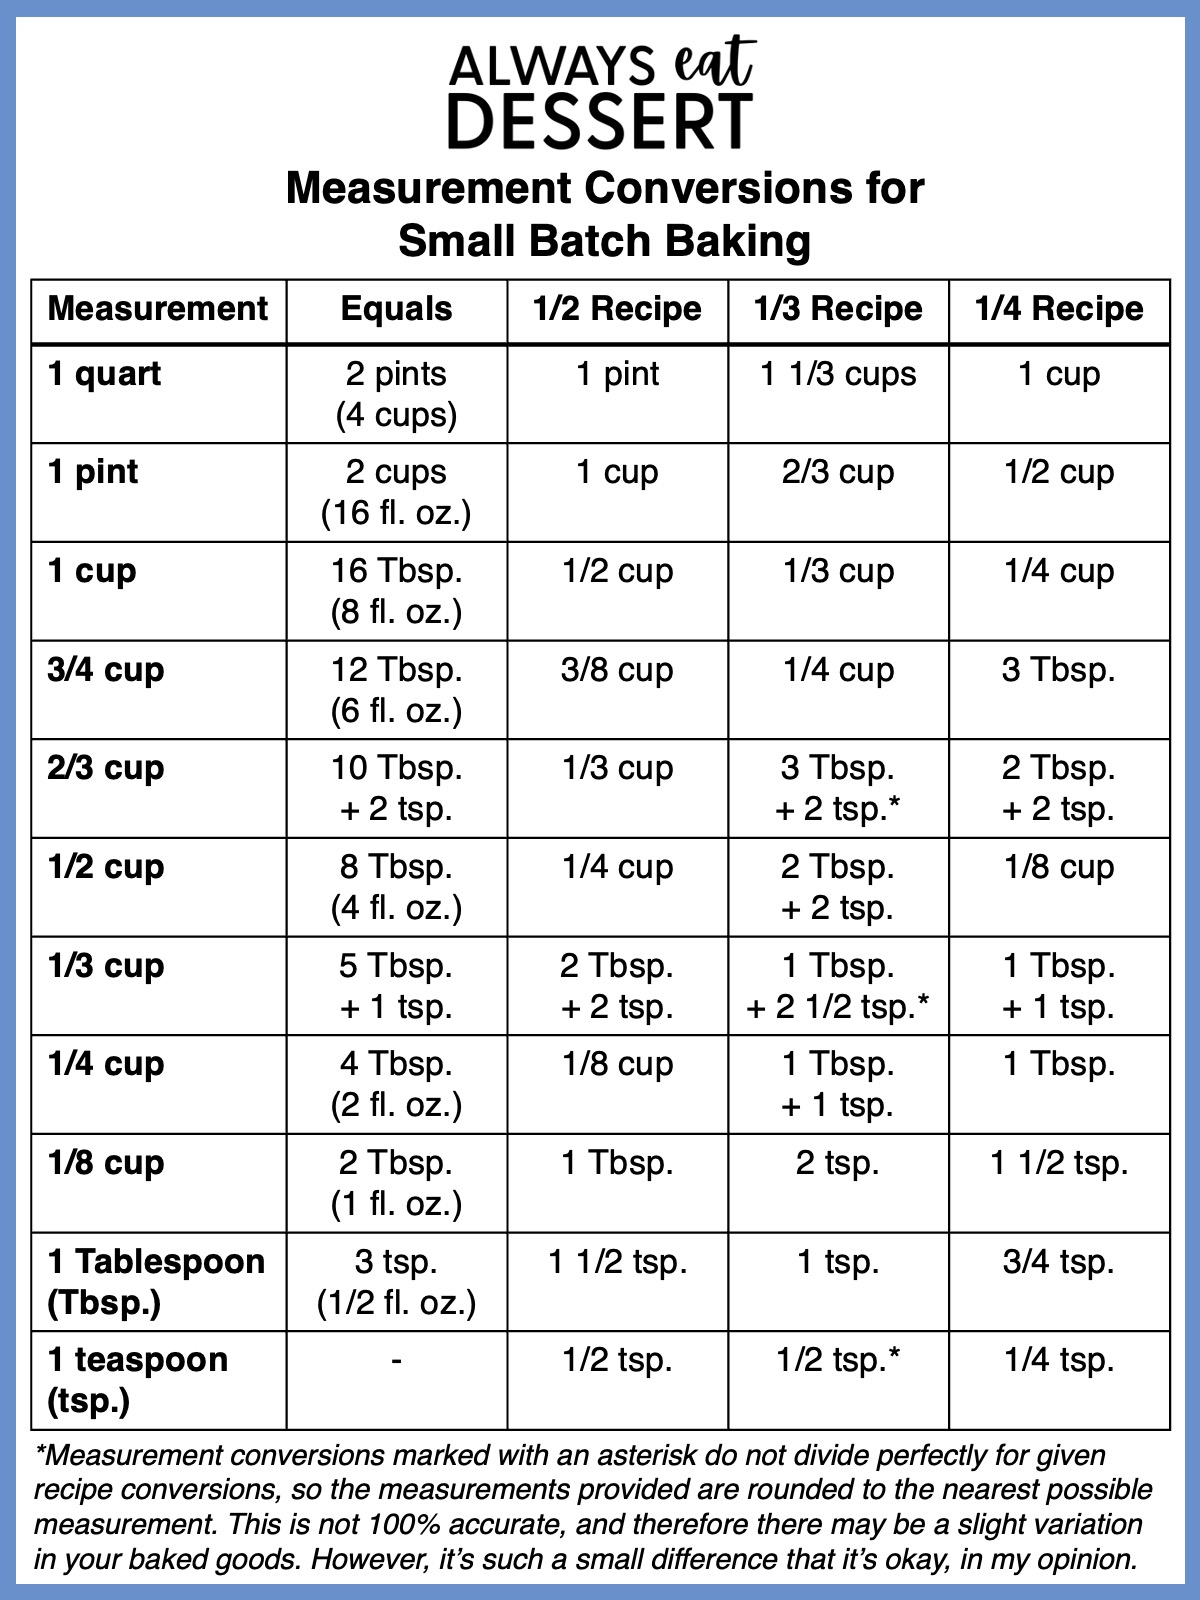 Chart outlining measurement and equivalents and conversions to assist home bakers with adapting recipes for small batch baking.